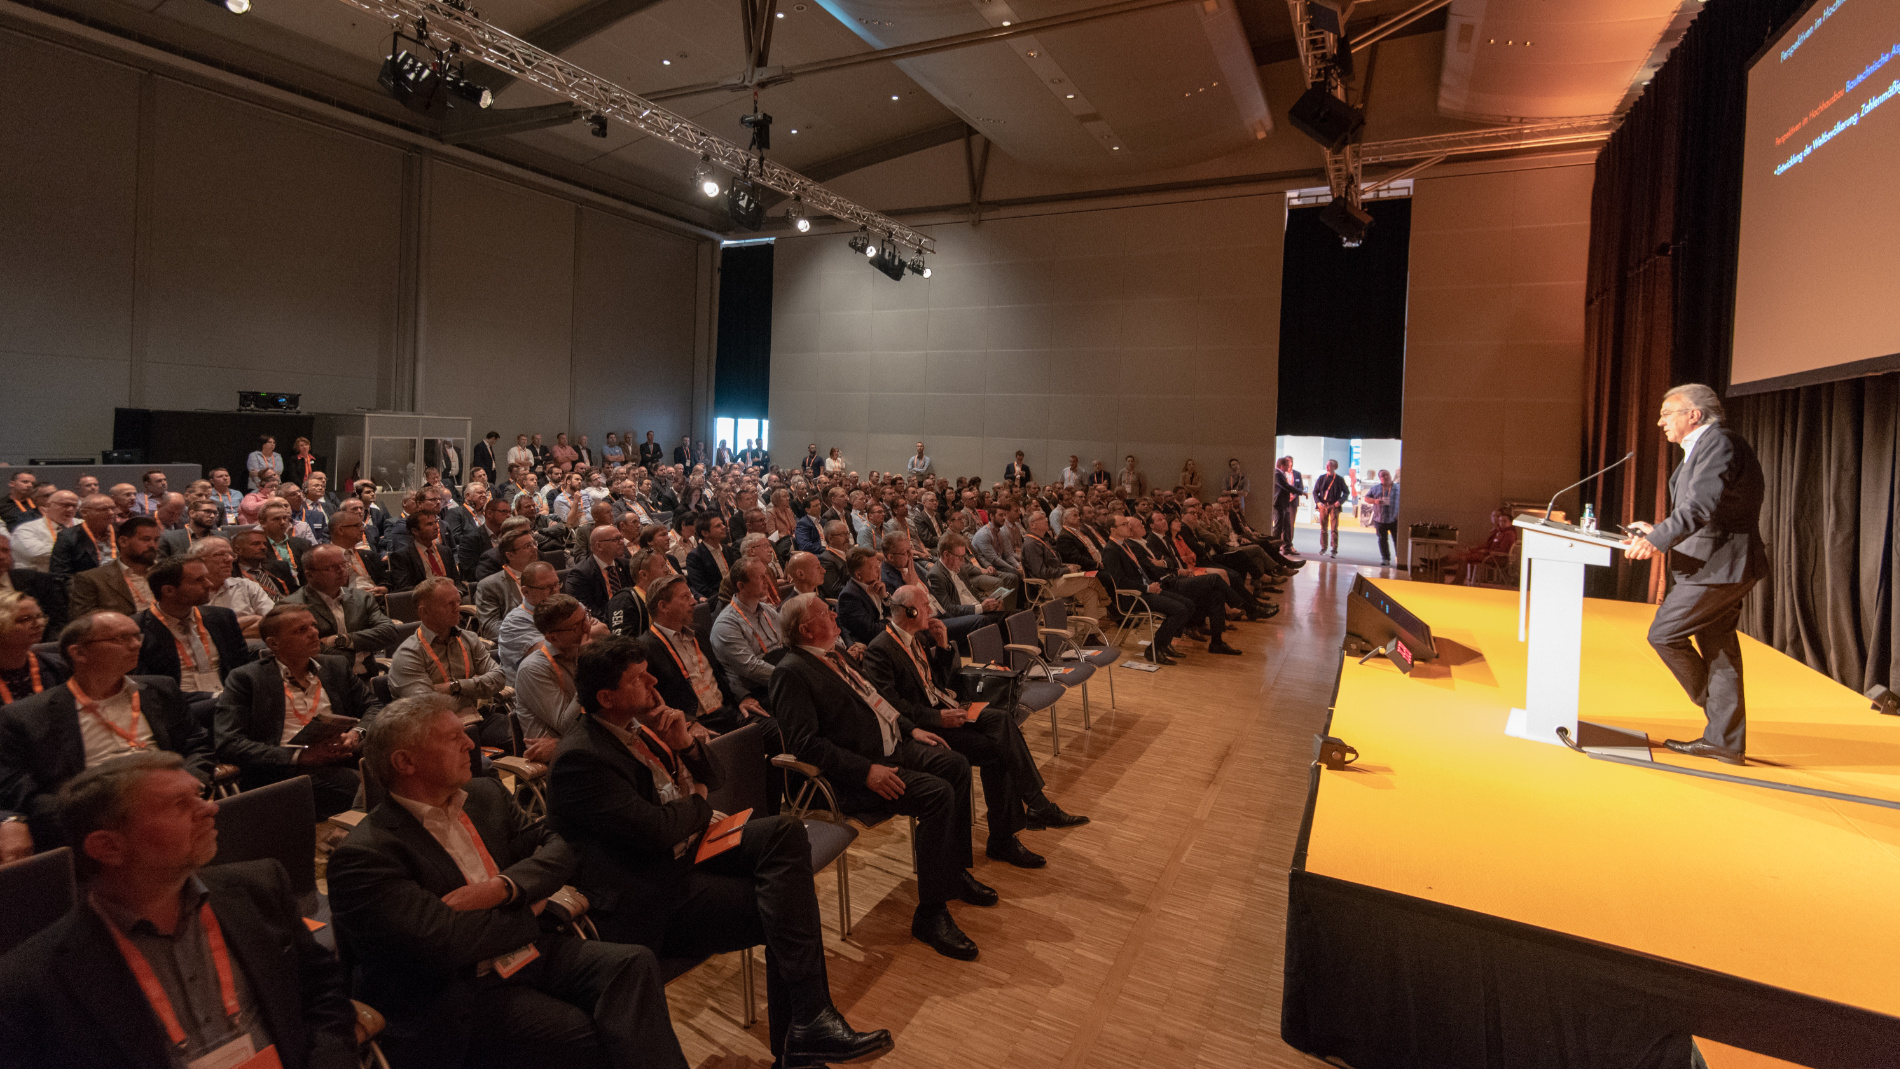 E2 Forum offers more than 40 lectures and discussion panels on opportunities for buildings of today and tomorrow. (Source: Messe Frankfurt / Sandra Gätke)